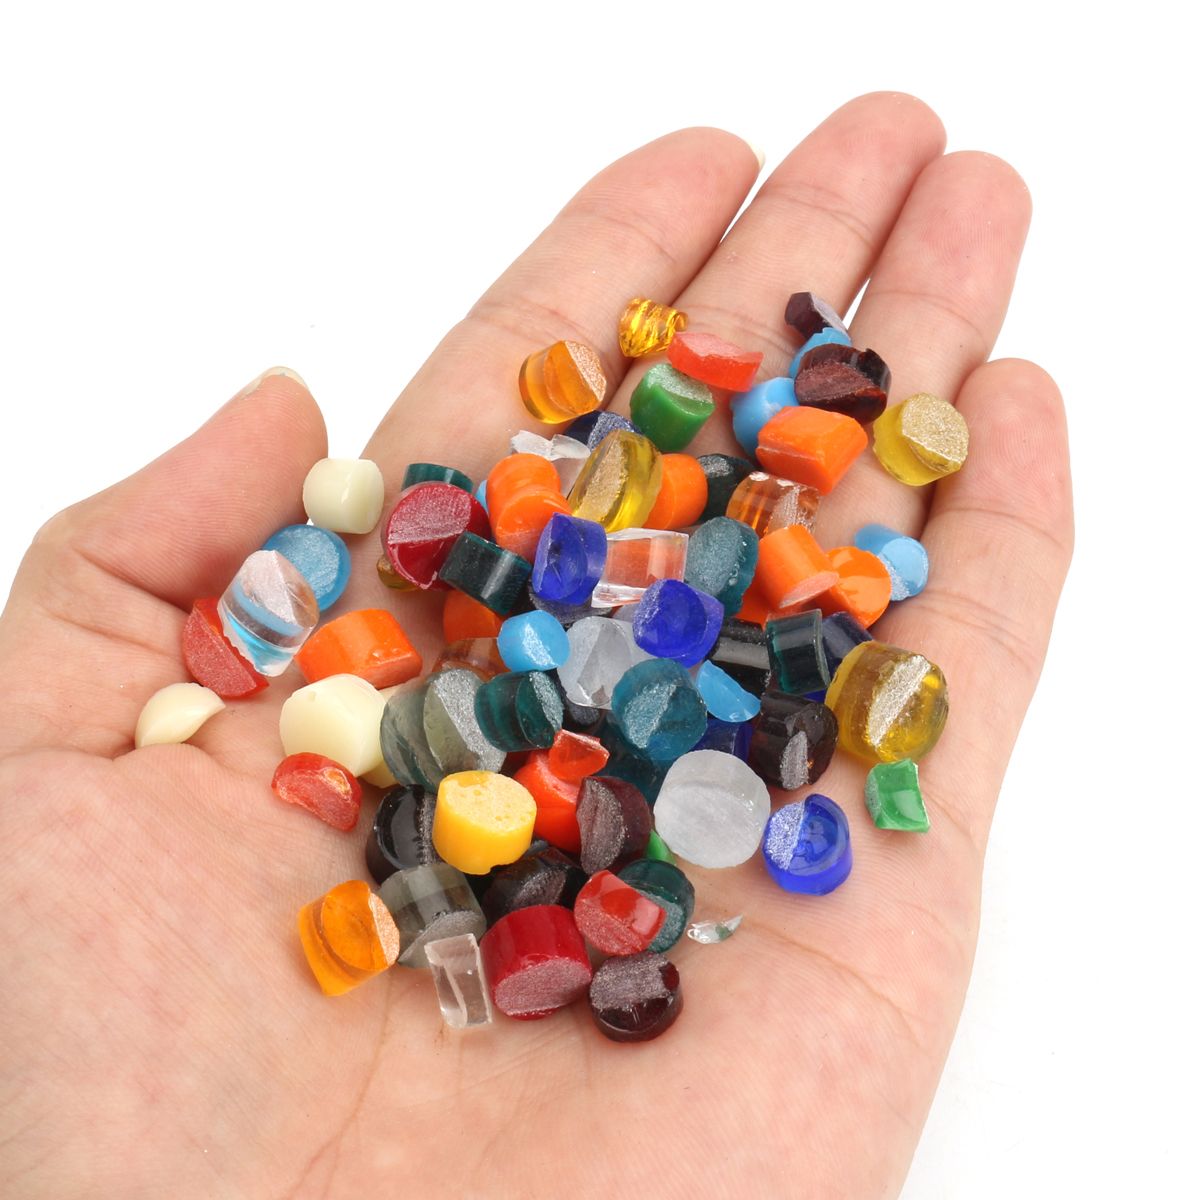 60g-Multicolor-Fusing-Glass-Frits-Fusible-Cnfetti-Lampwork-Dots-for-Microwave-Kiln-DIY-Jewelry-1208275